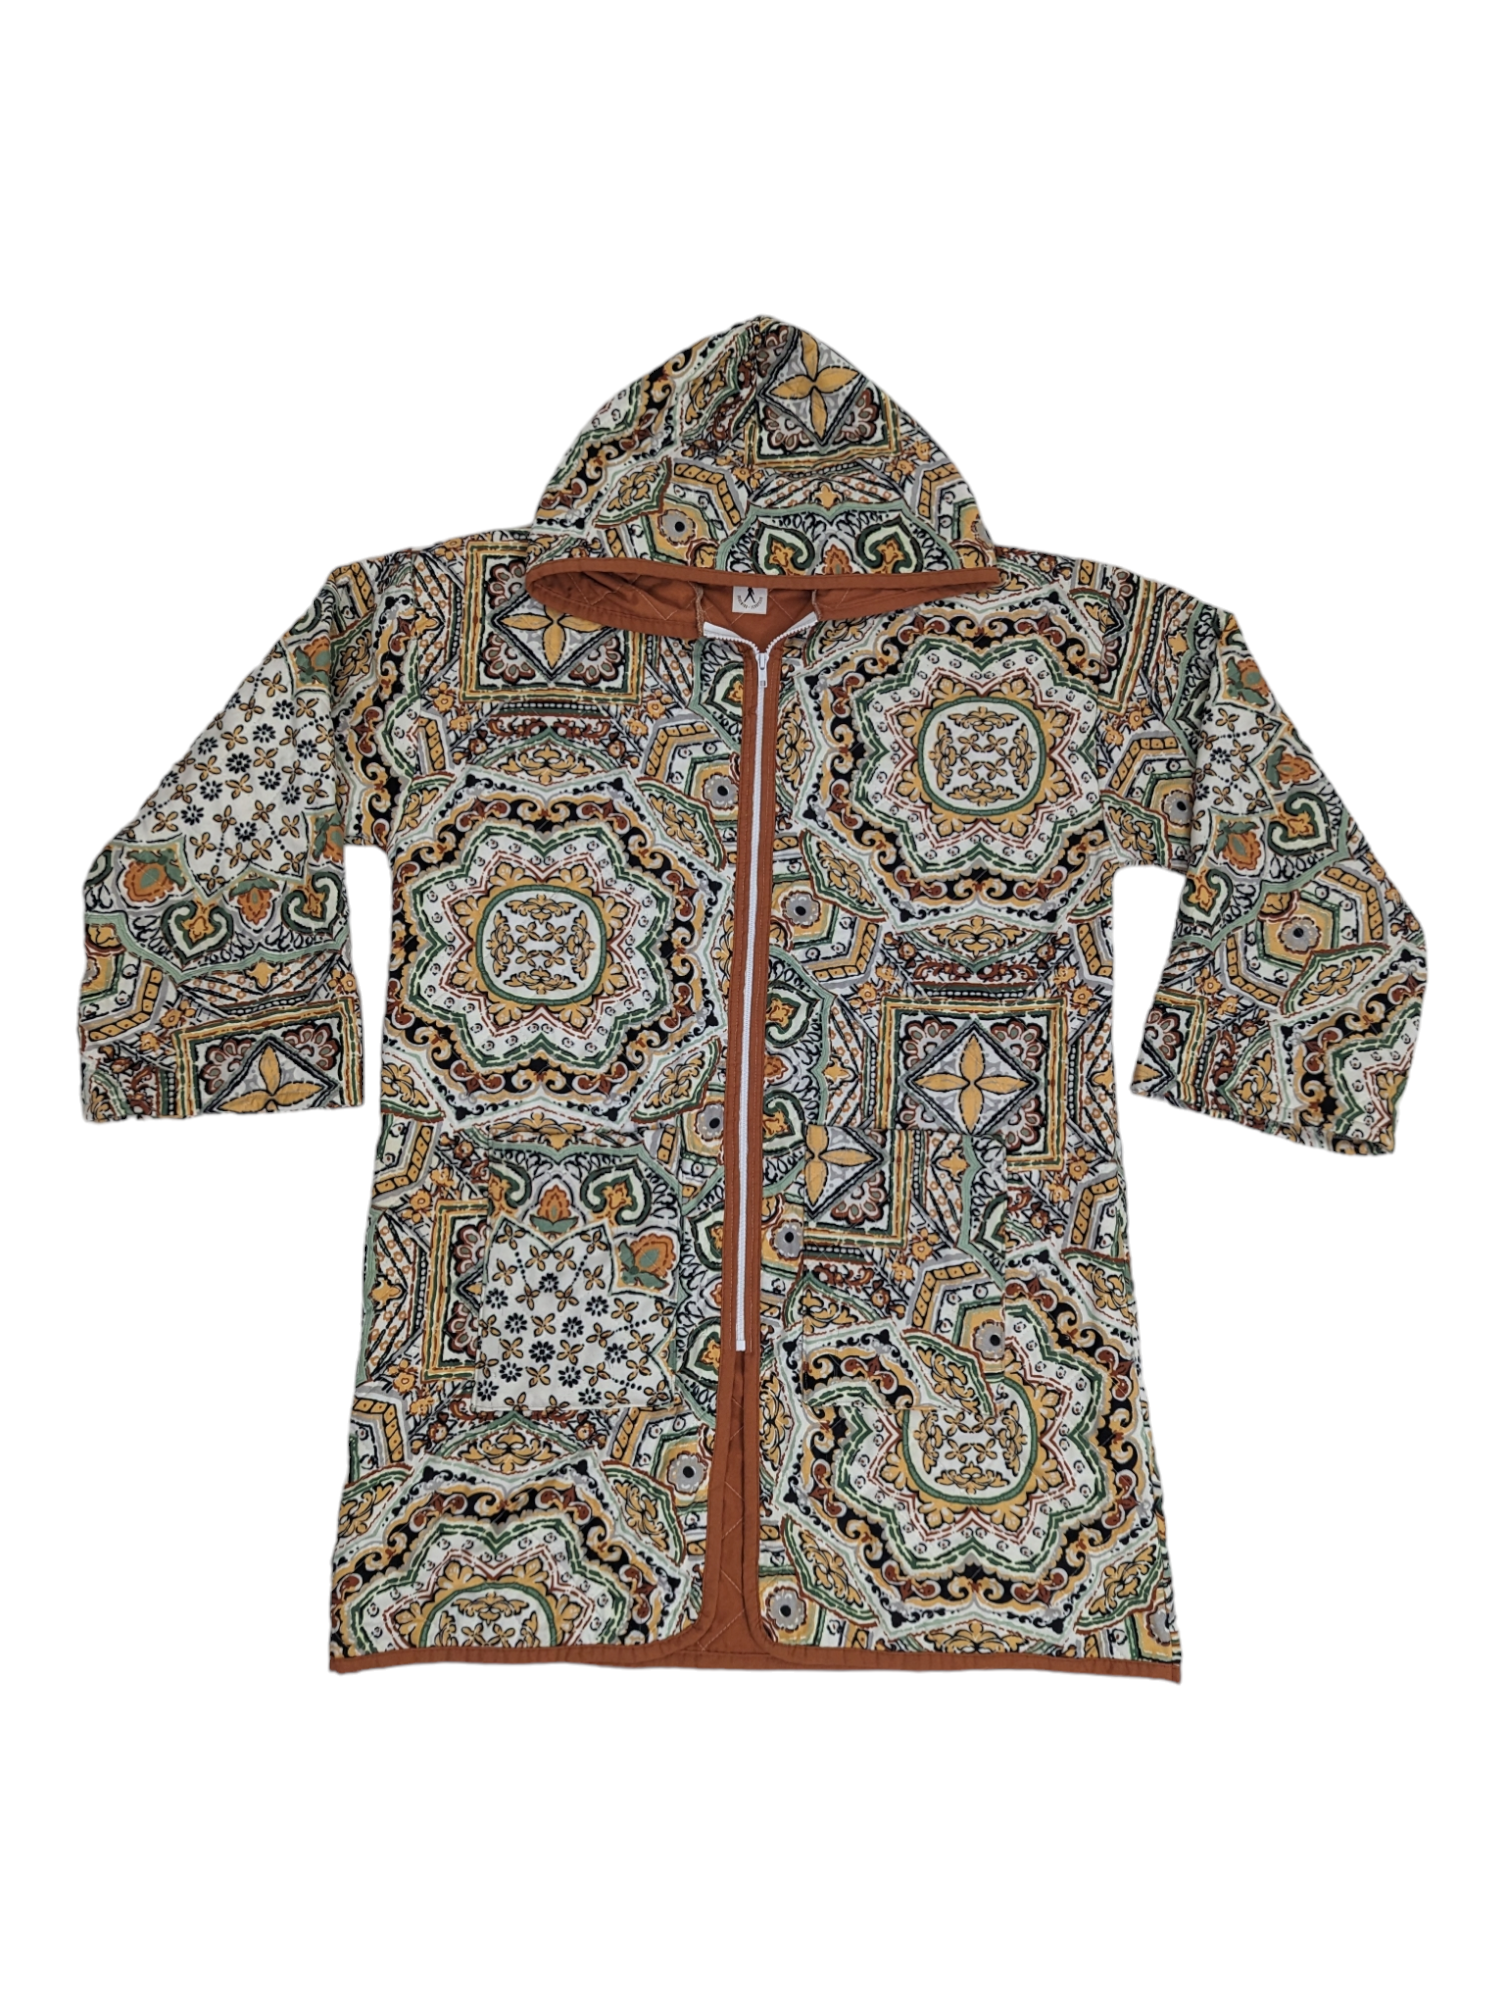 Front view of psychedelic patterned upcycled blanket hoodie.